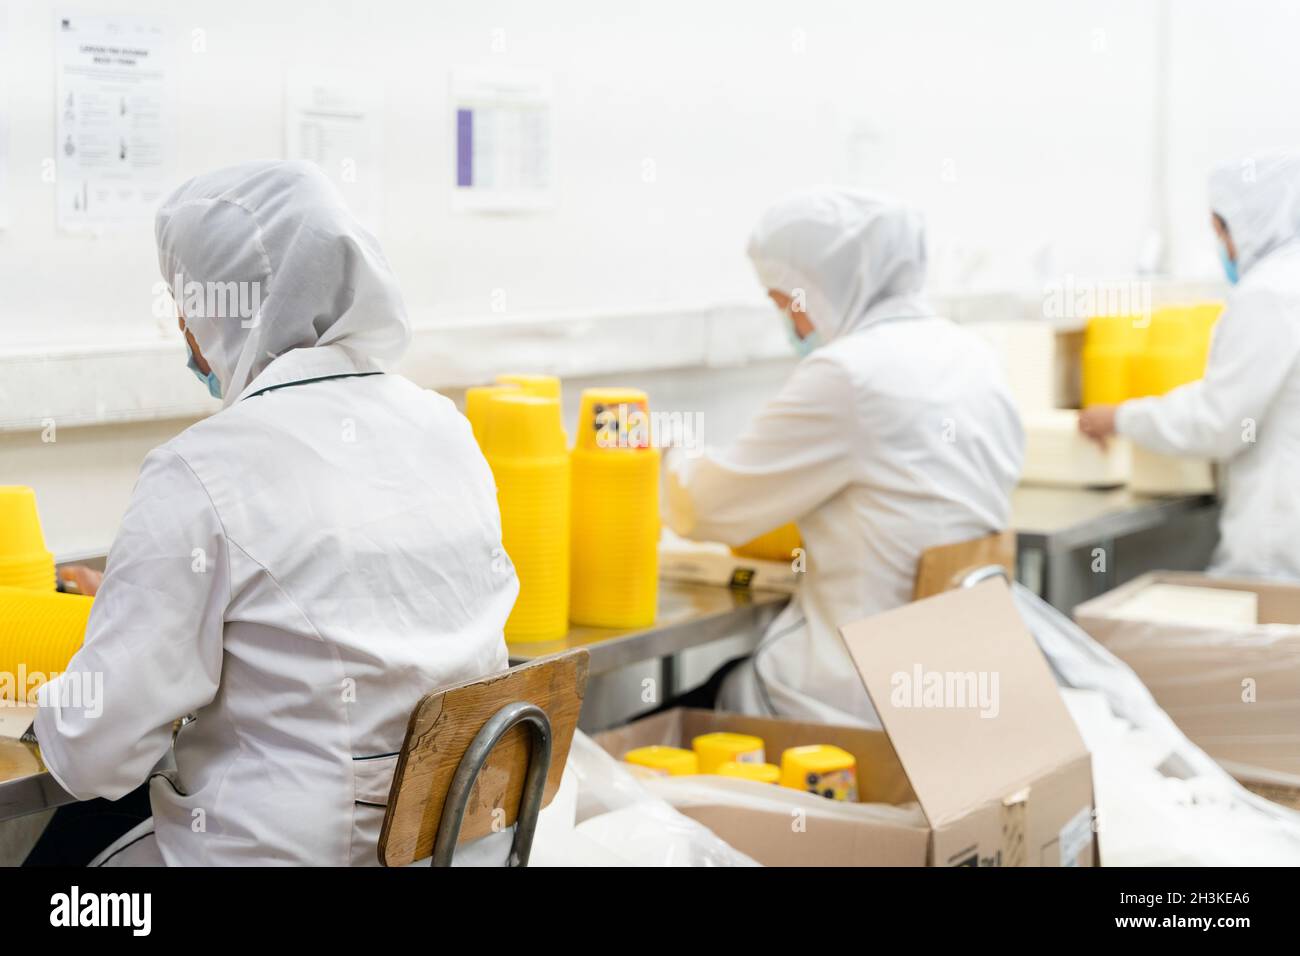 Anonymous workers on white protective uniforms packaging yellow containers at industrial factory. Production line, quality control labor concepts Stock Photo